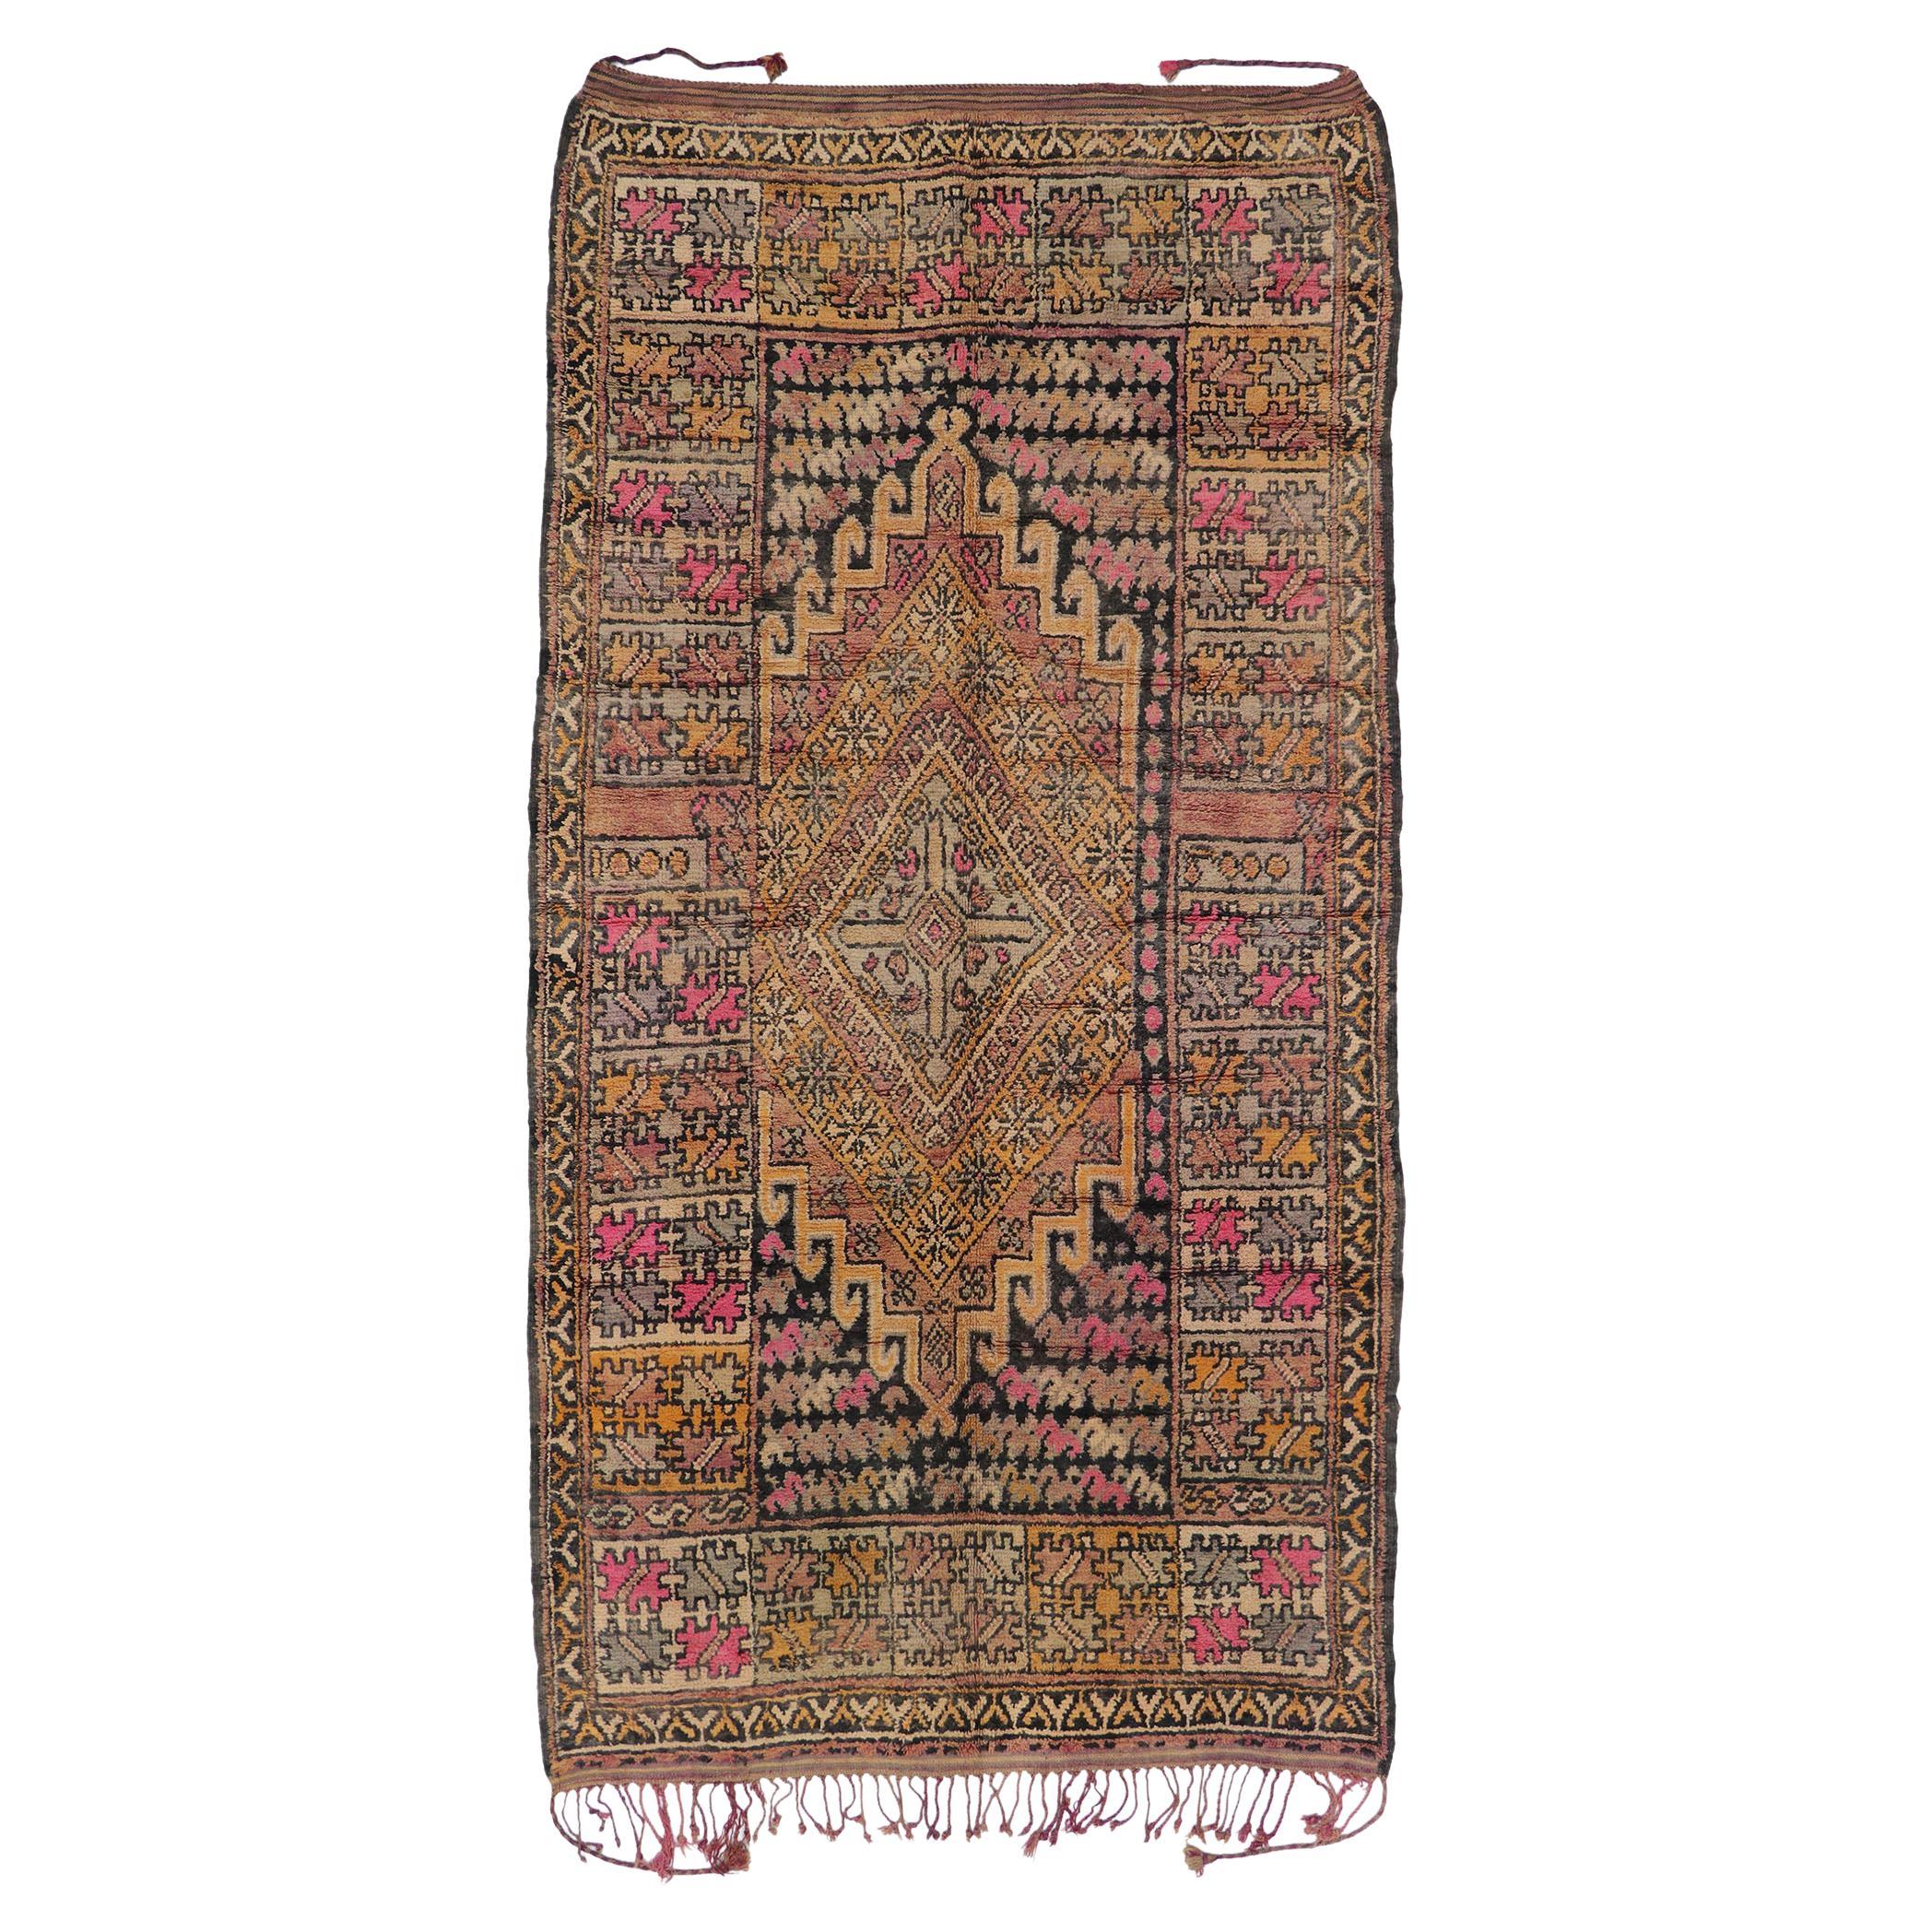 Vintage Berber Boujad Moroccan Rug with Bohemian Style